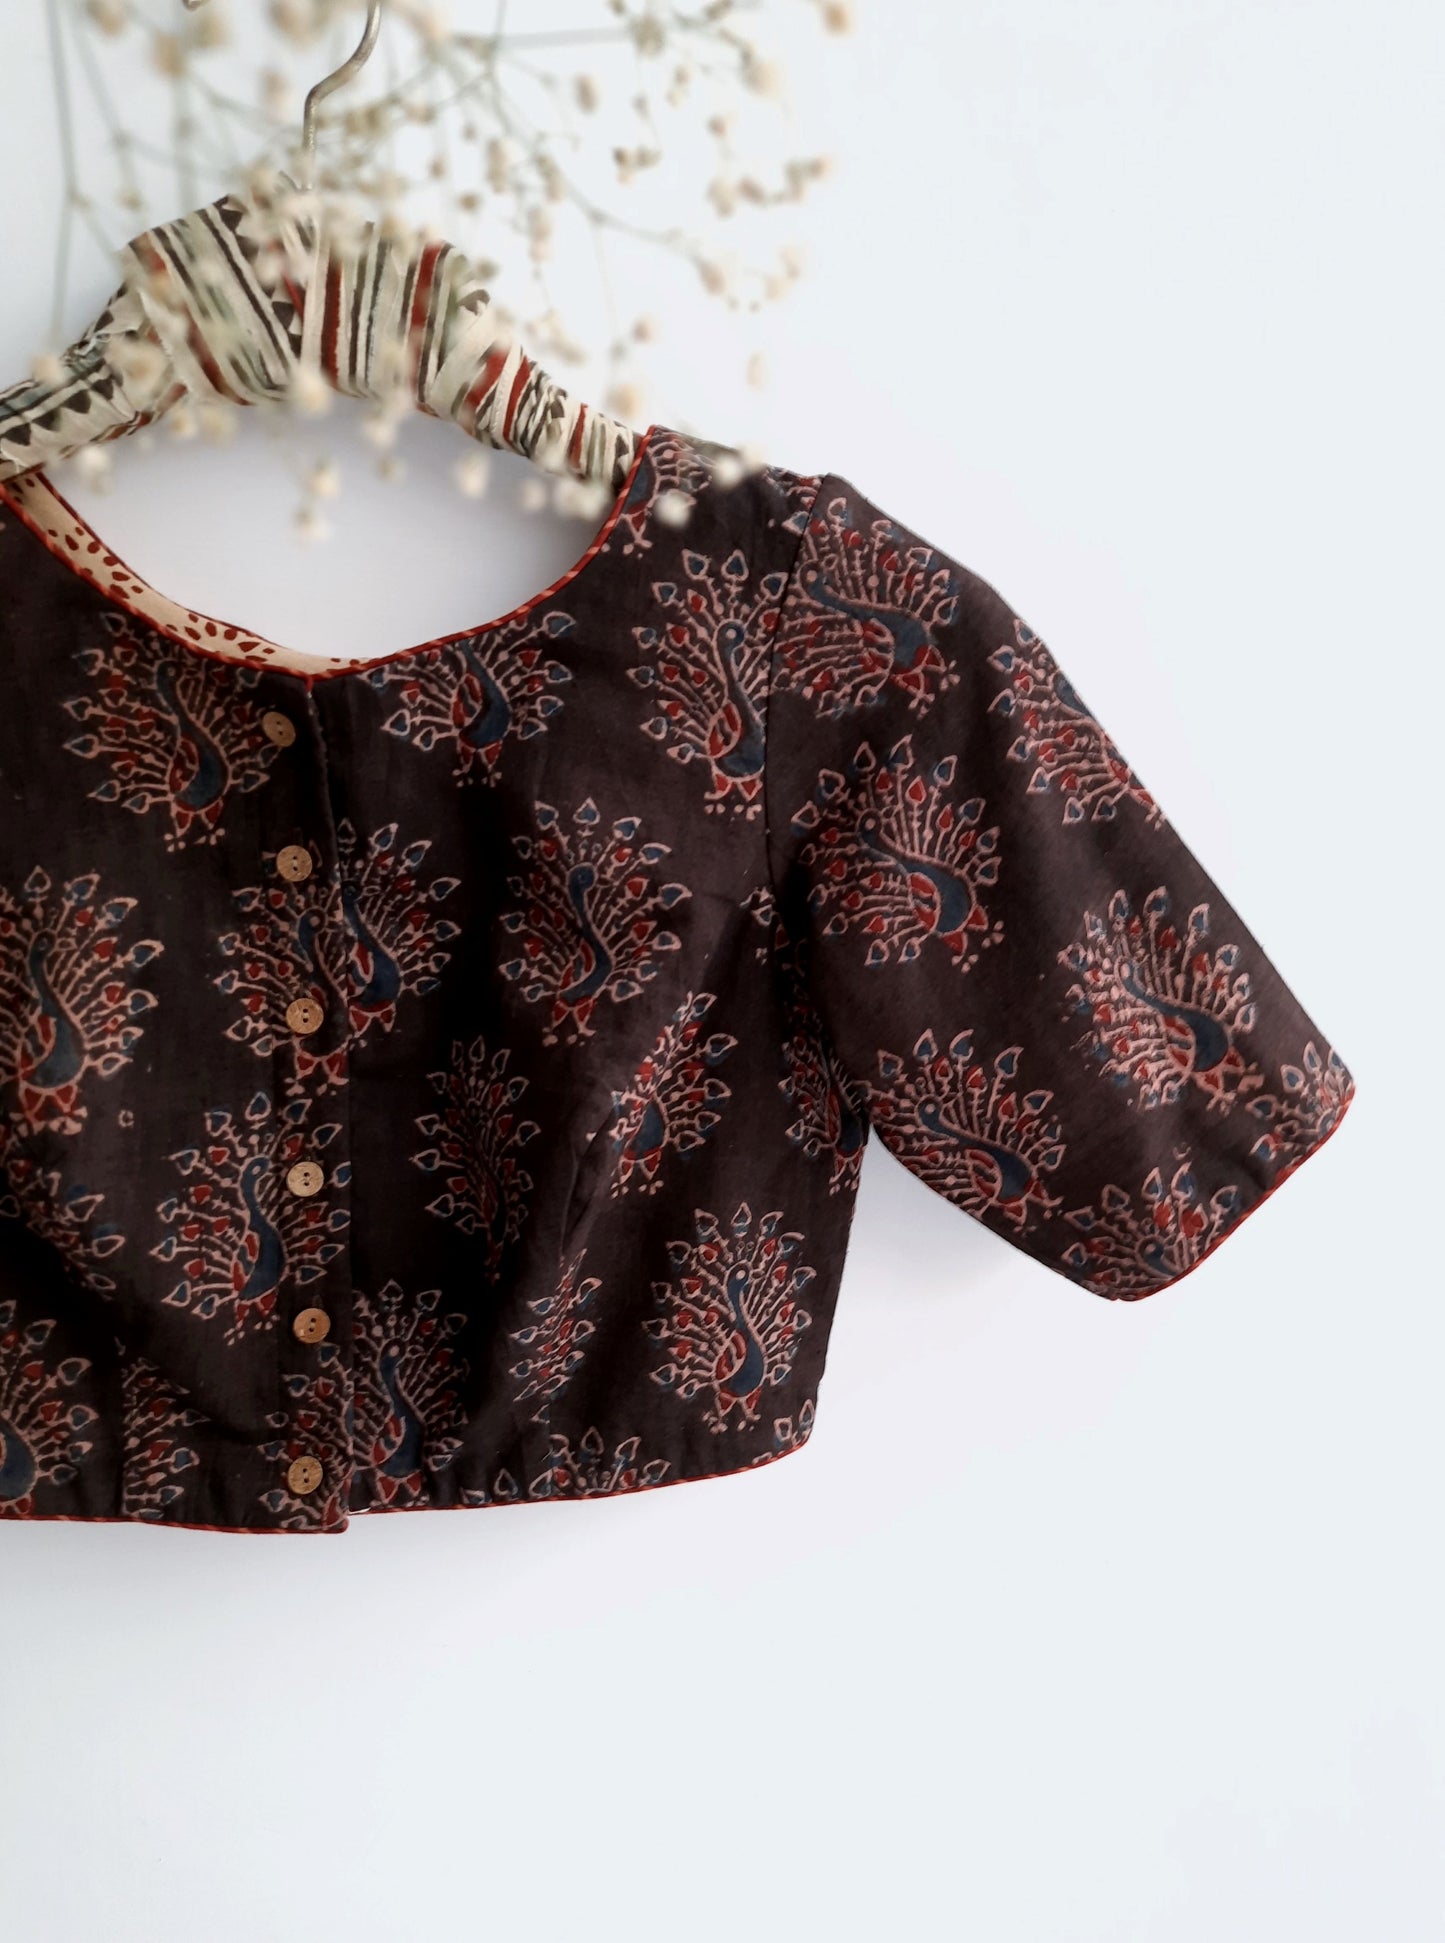 Ajrakh hand block print blouse in brown color, Brown ajrakh prints blouse, Handmade ajrakh blouse, Sale